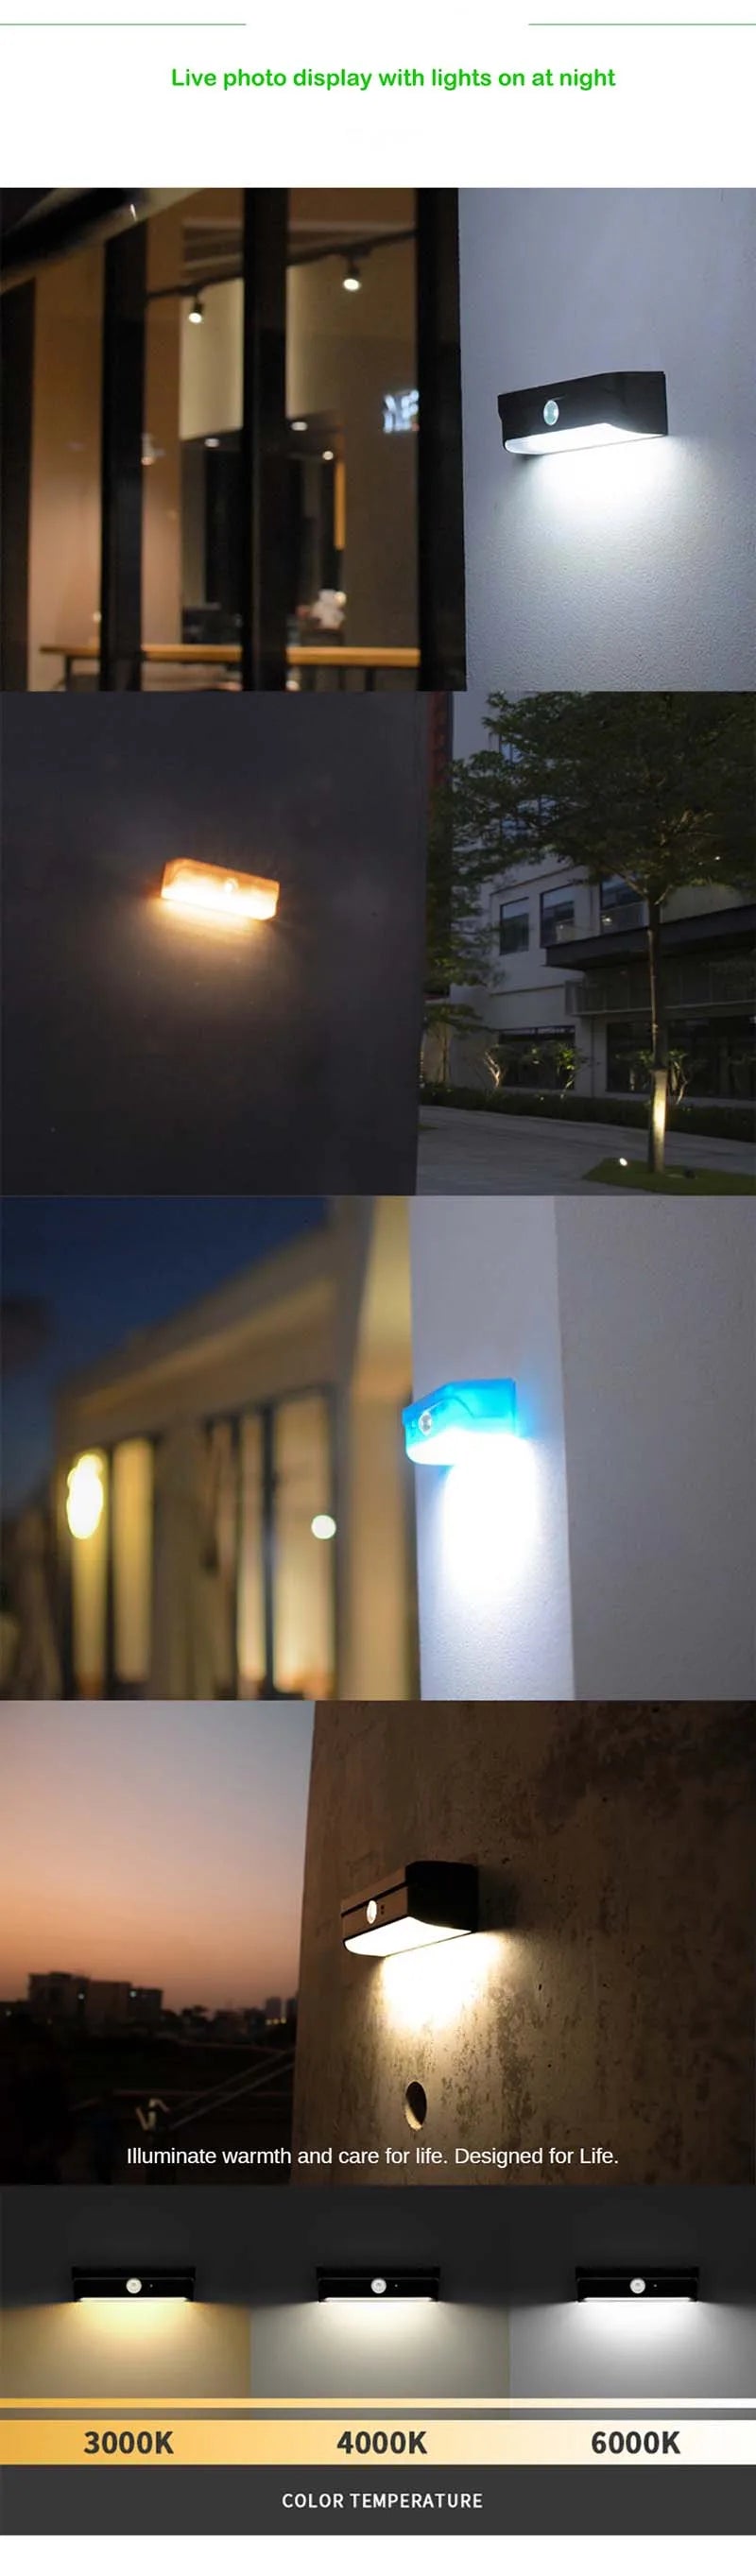 Solar Outdoor Light, Candle-like lamp with adjustable color temperature for cozy ambiance.